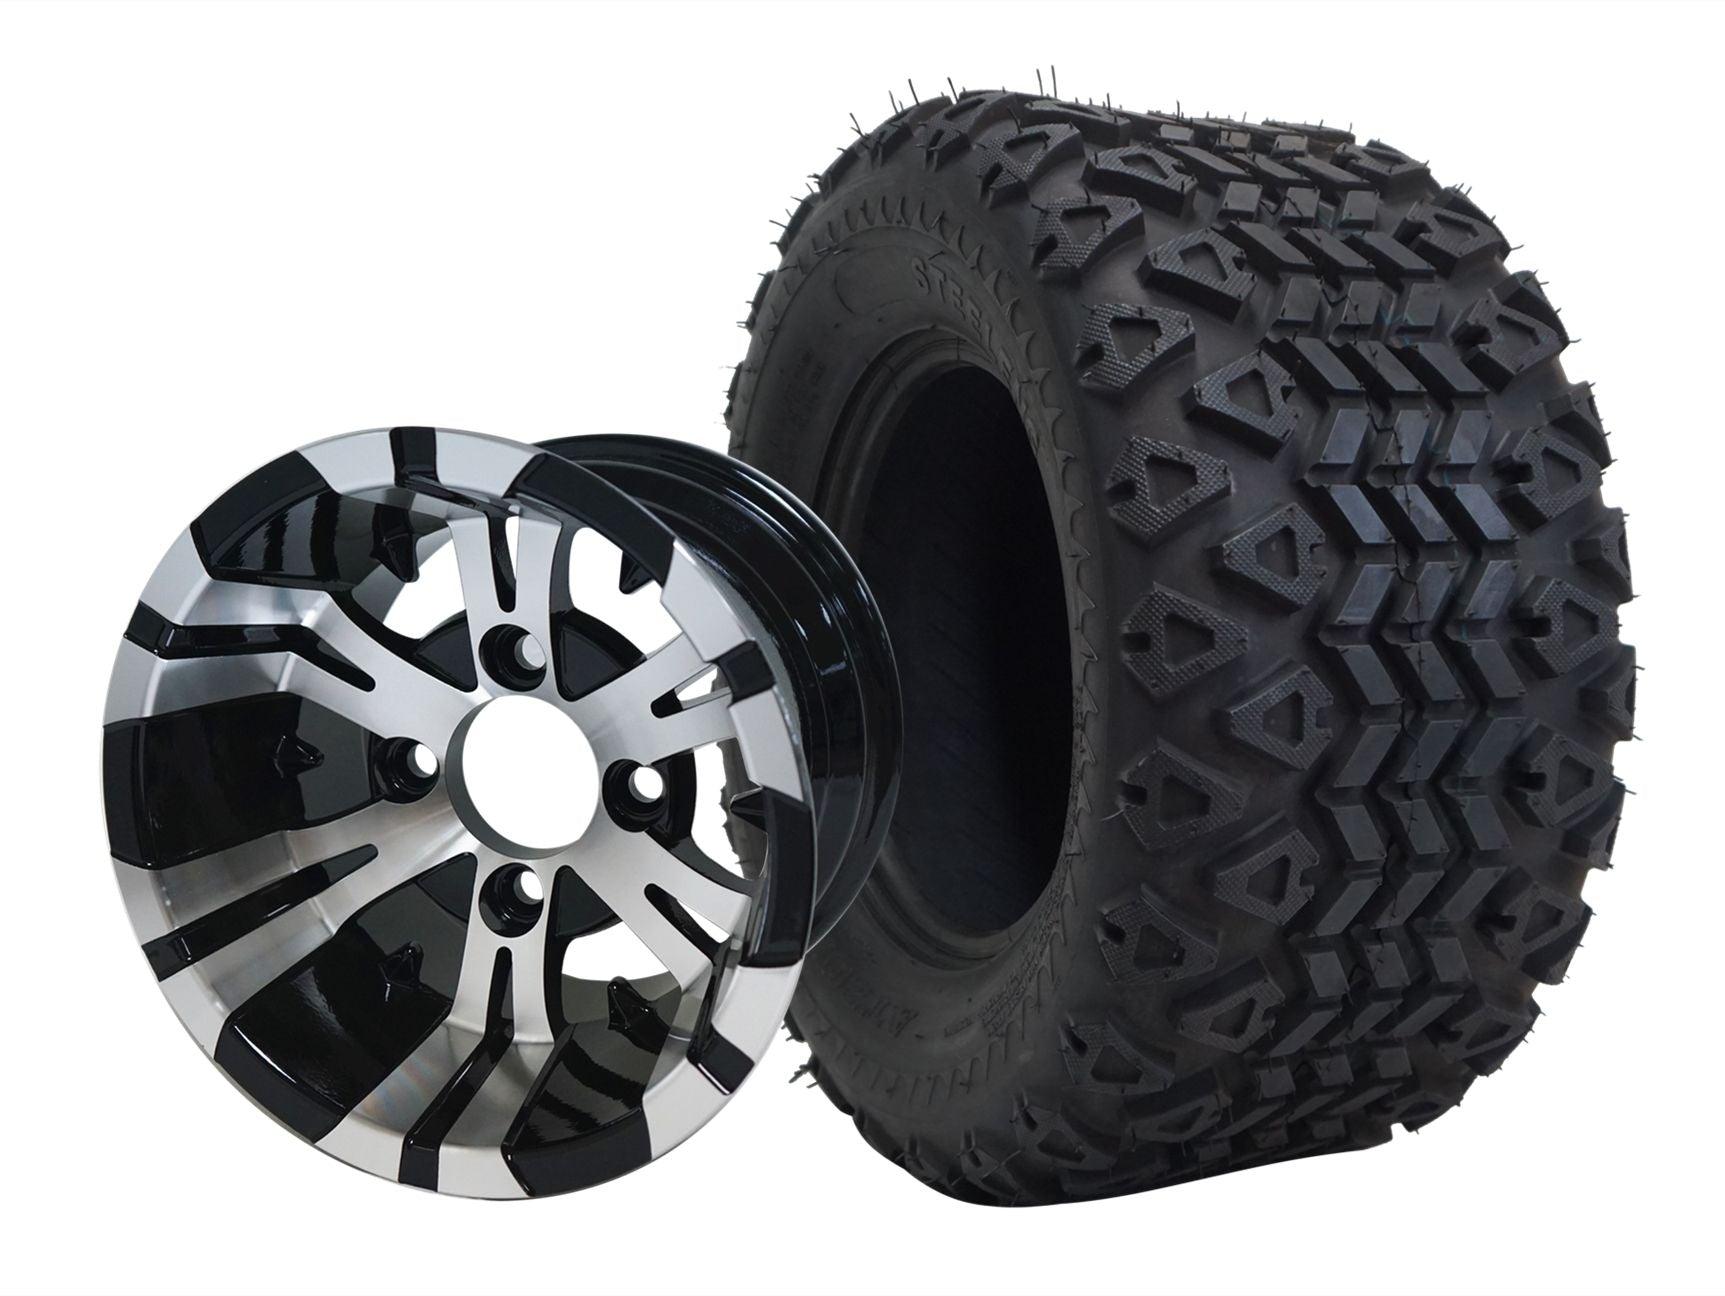 10" Vampire Machined Black Wheel With 20x10-10 All Terrain DOT Tire WH1022-TR1007